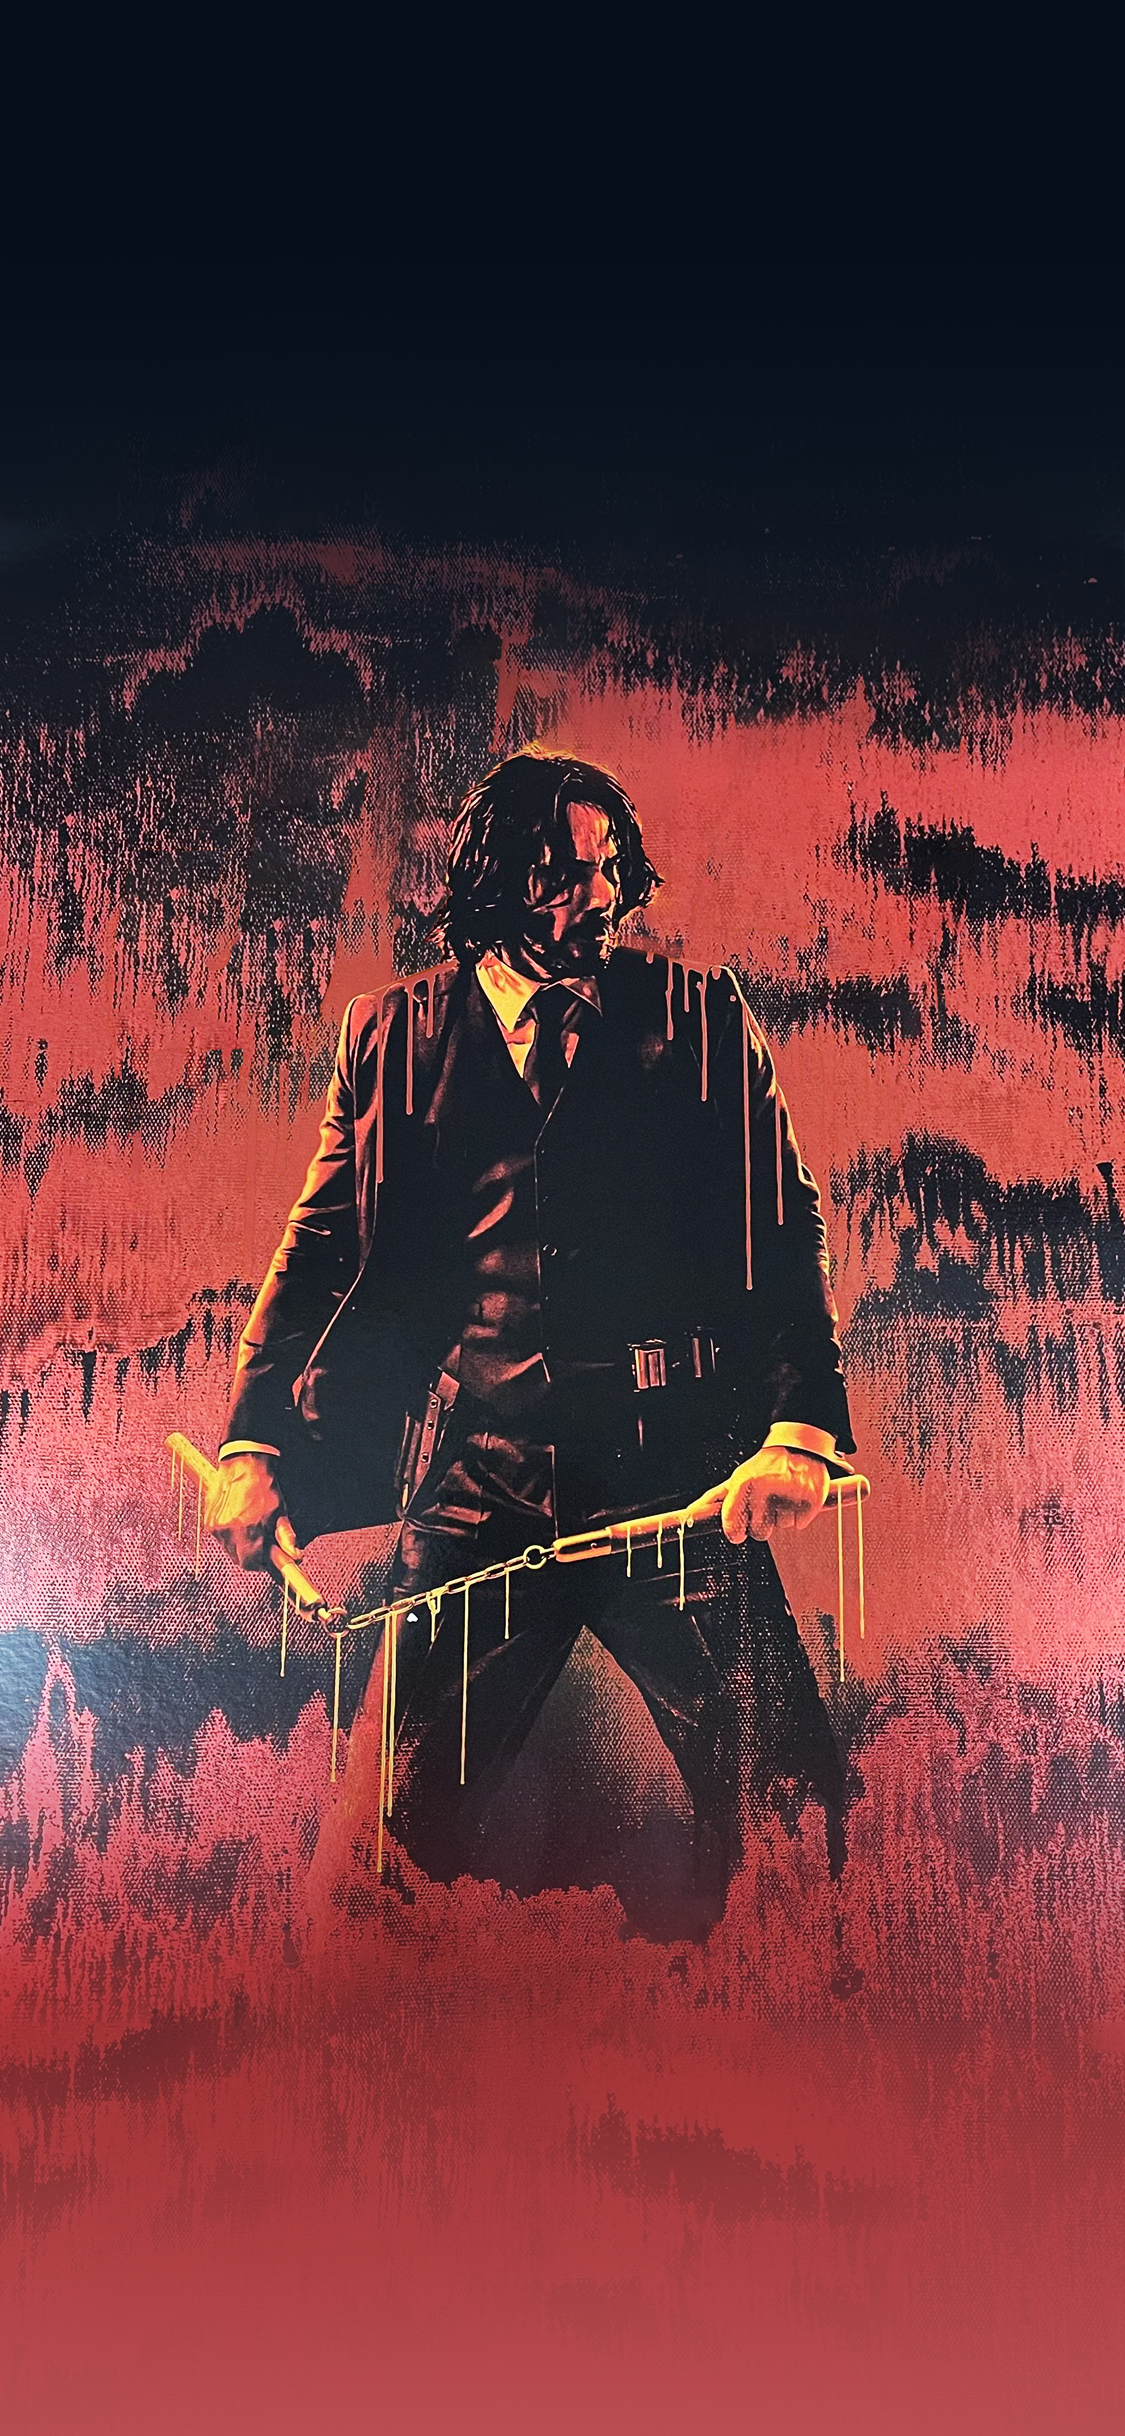 Converted the SDCC John Wick 4 poster into a mobile wallpaper